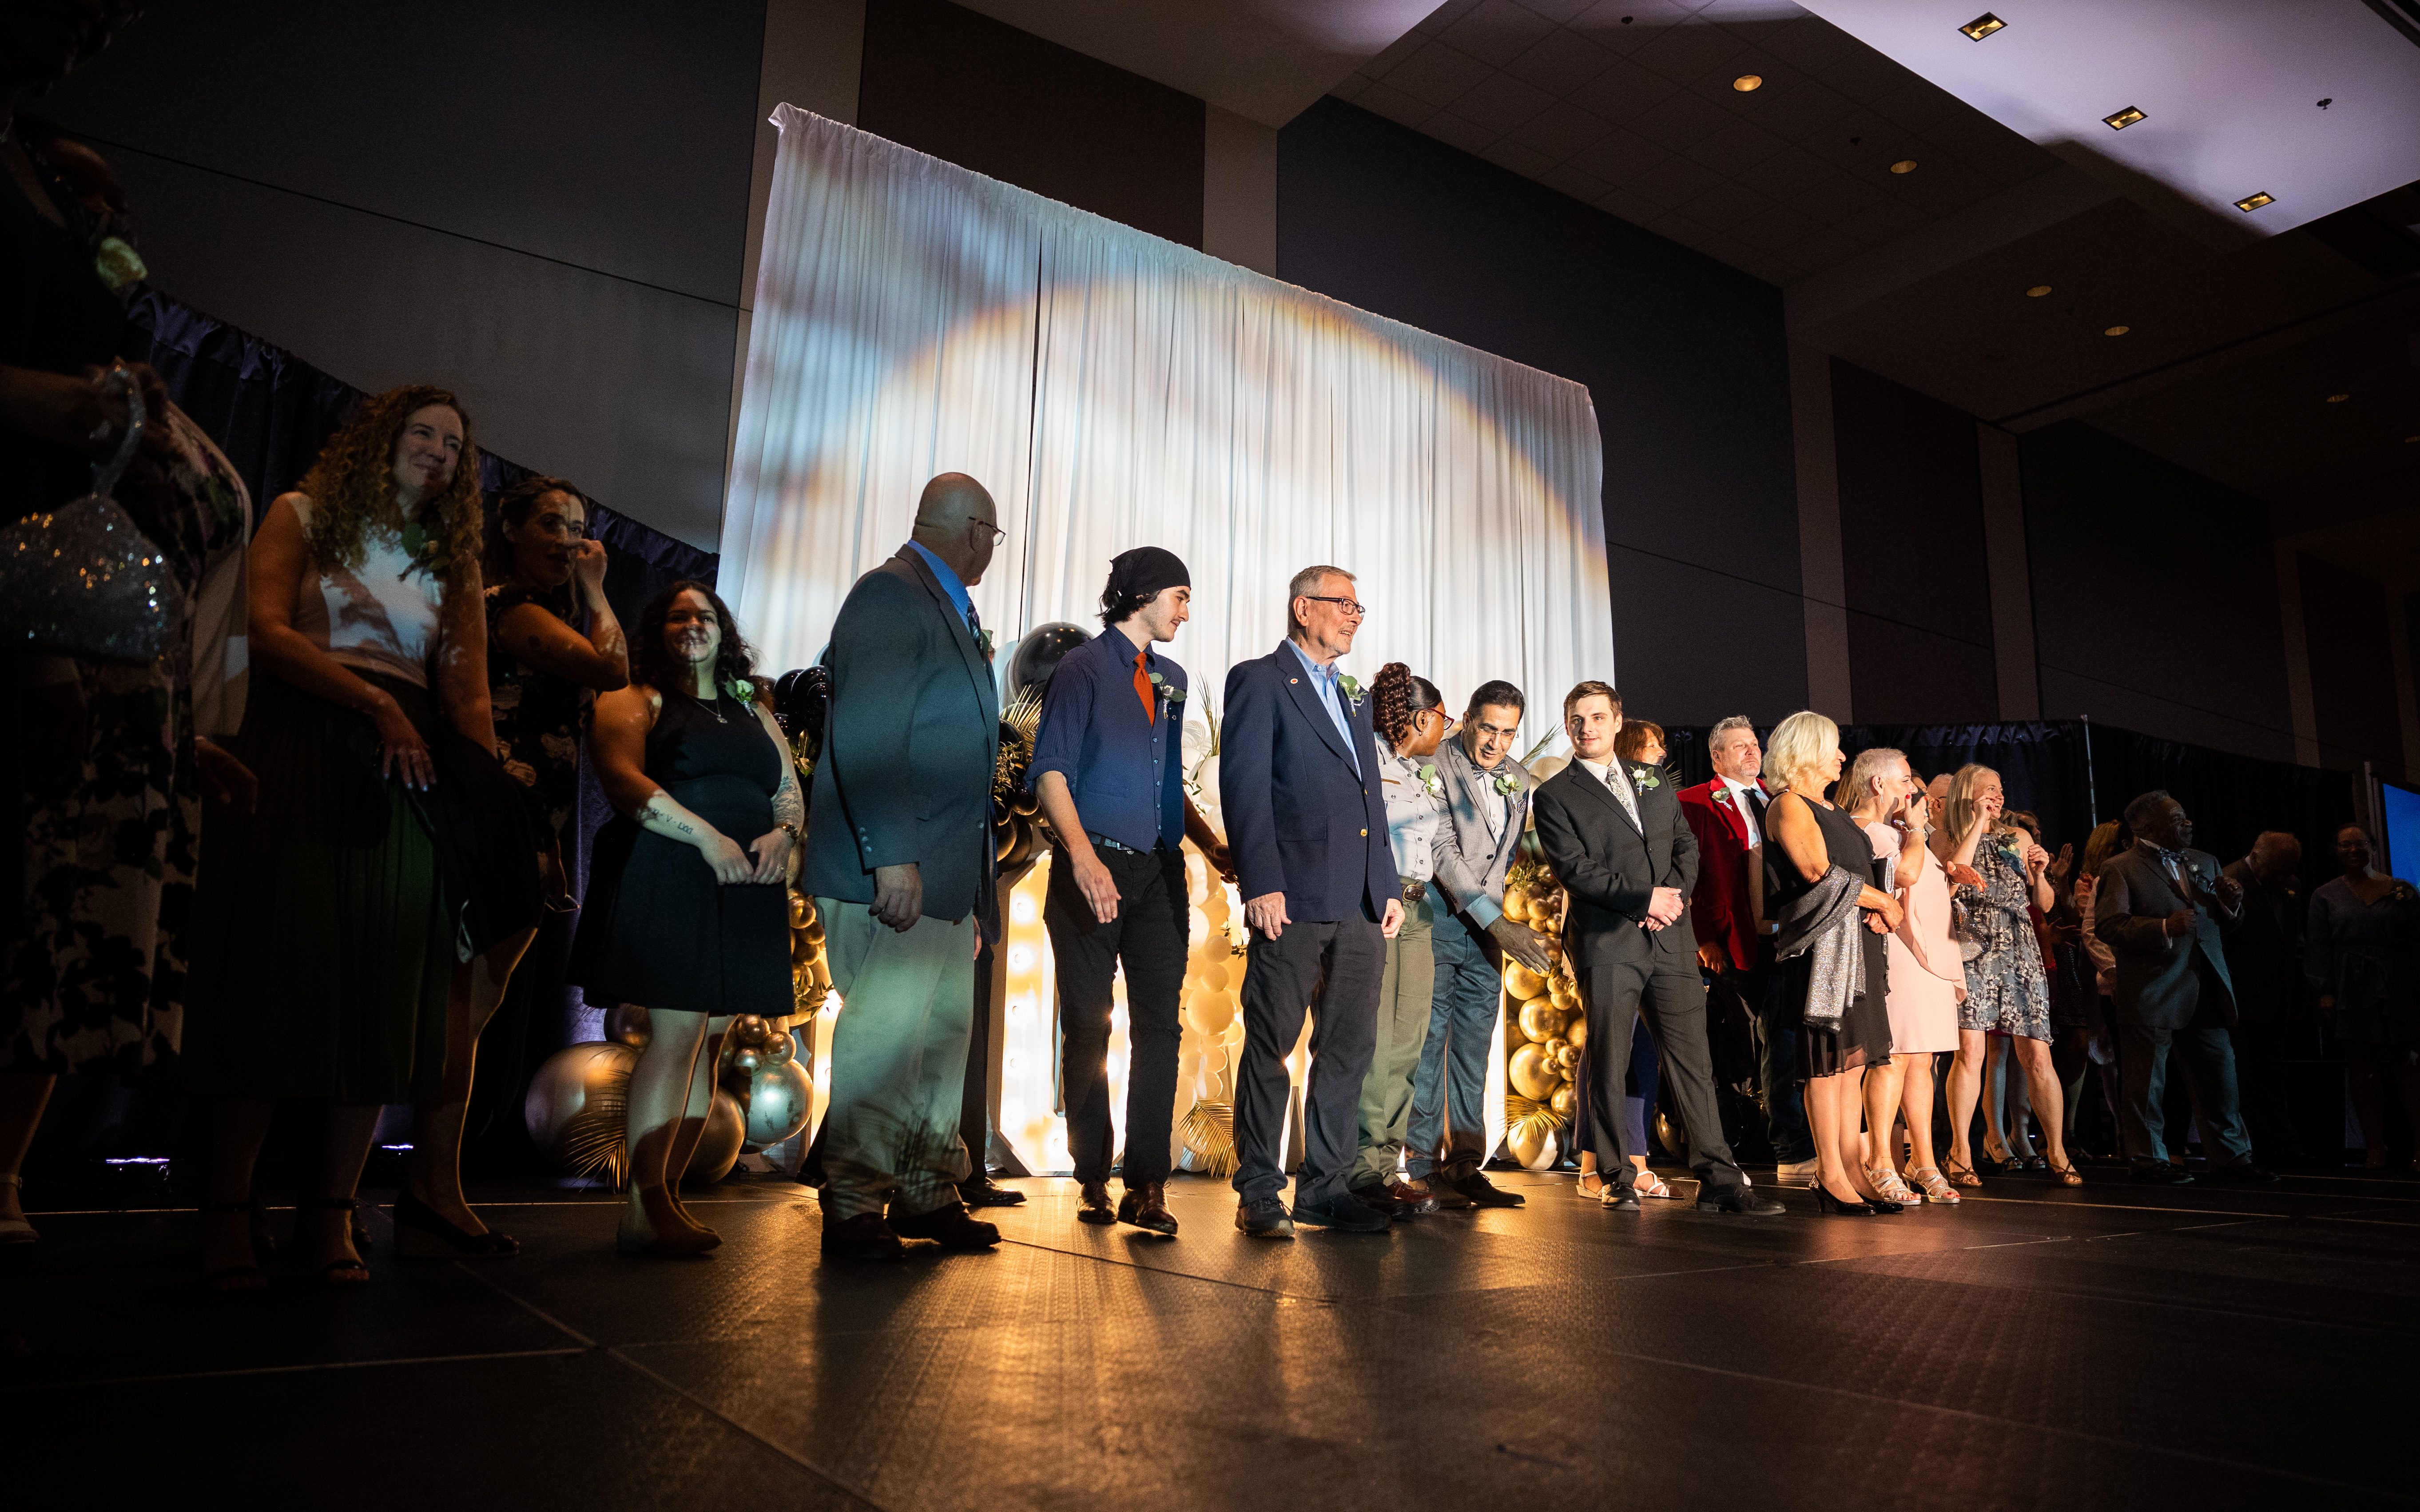 Finalists are being recognized on stage at the 25th annual Howdy Awards for Hospitality Excellence held at the MassMutual Center Monday evening, May 16, 2022. (Hoang ‘Leon’ Nguyen / The Republican)